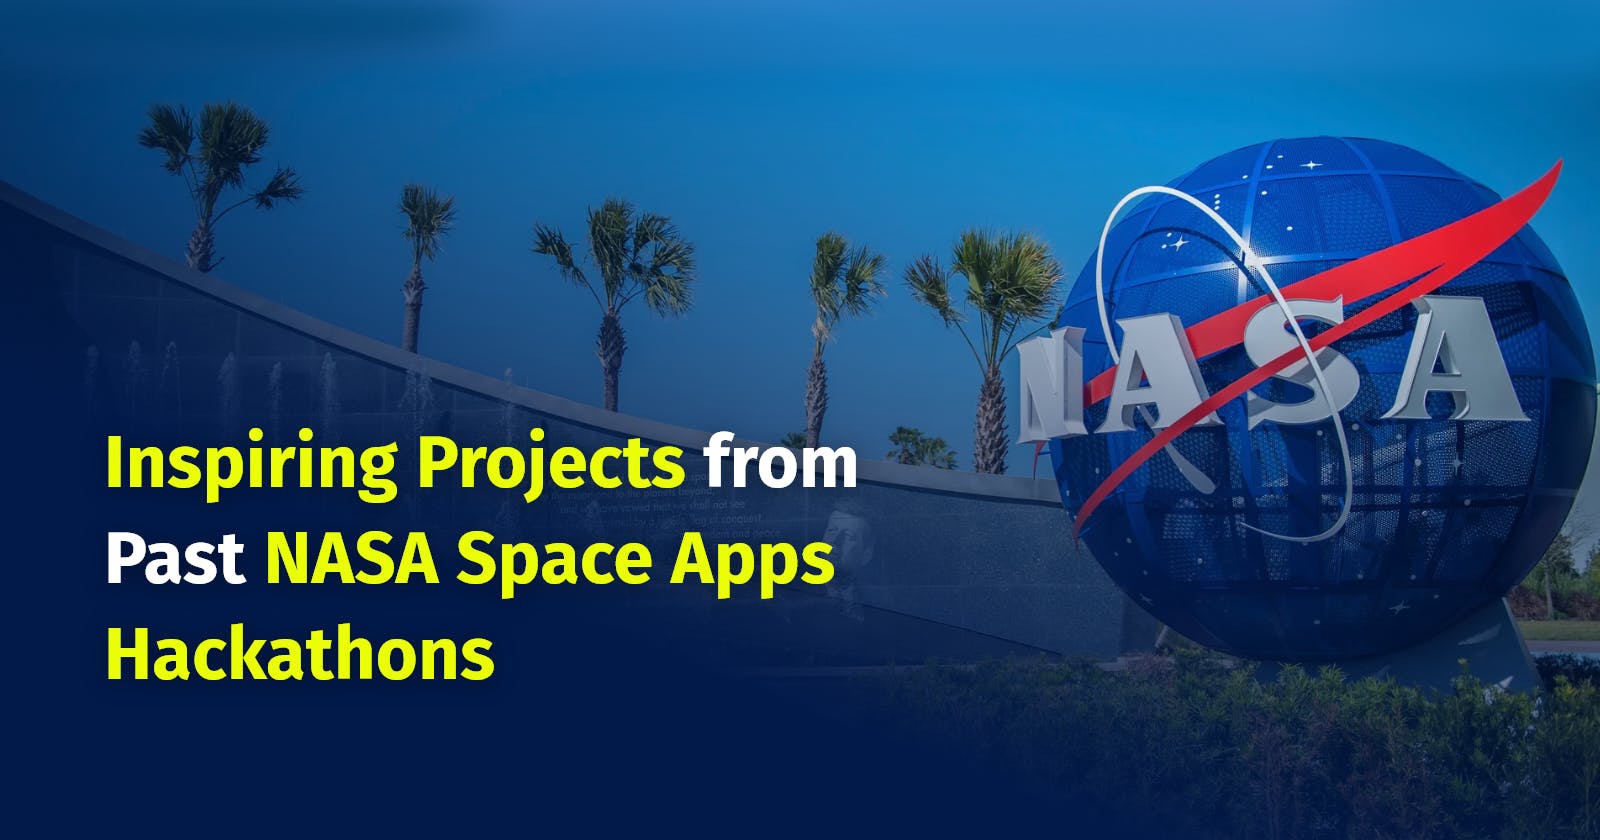 Inspiring Projects from Past NASA Space Apps Hackathons